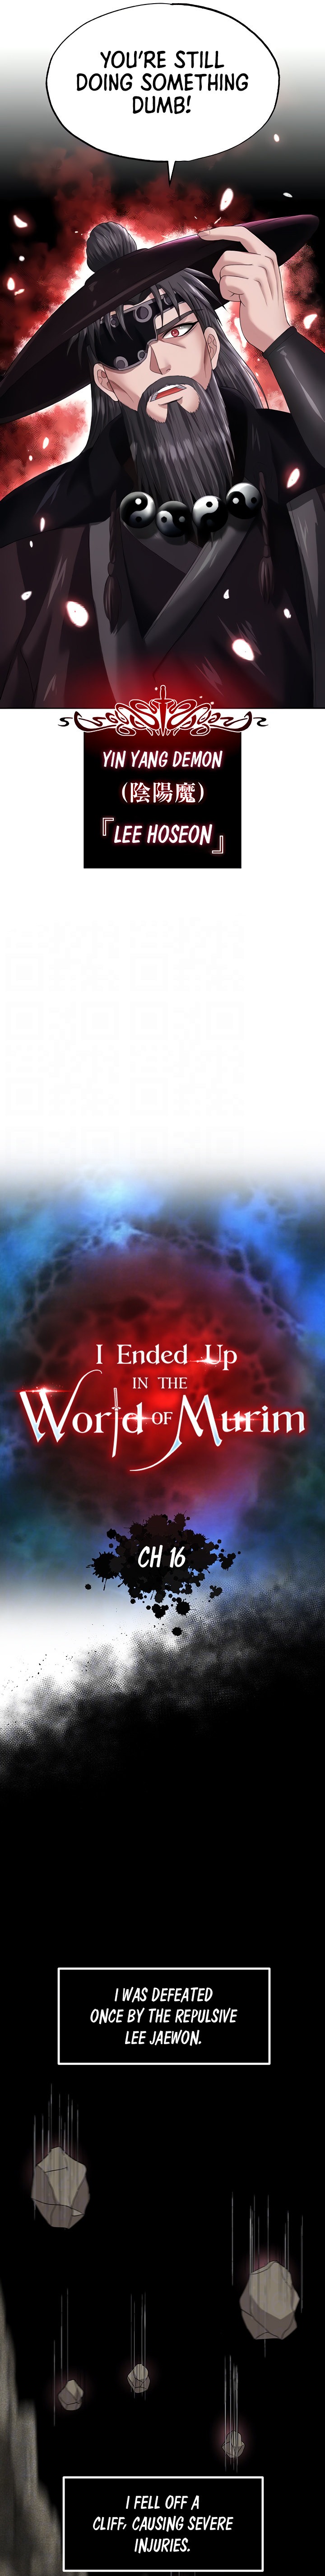 I Ended Up in the World of Murim - Chapter 16 Page 3